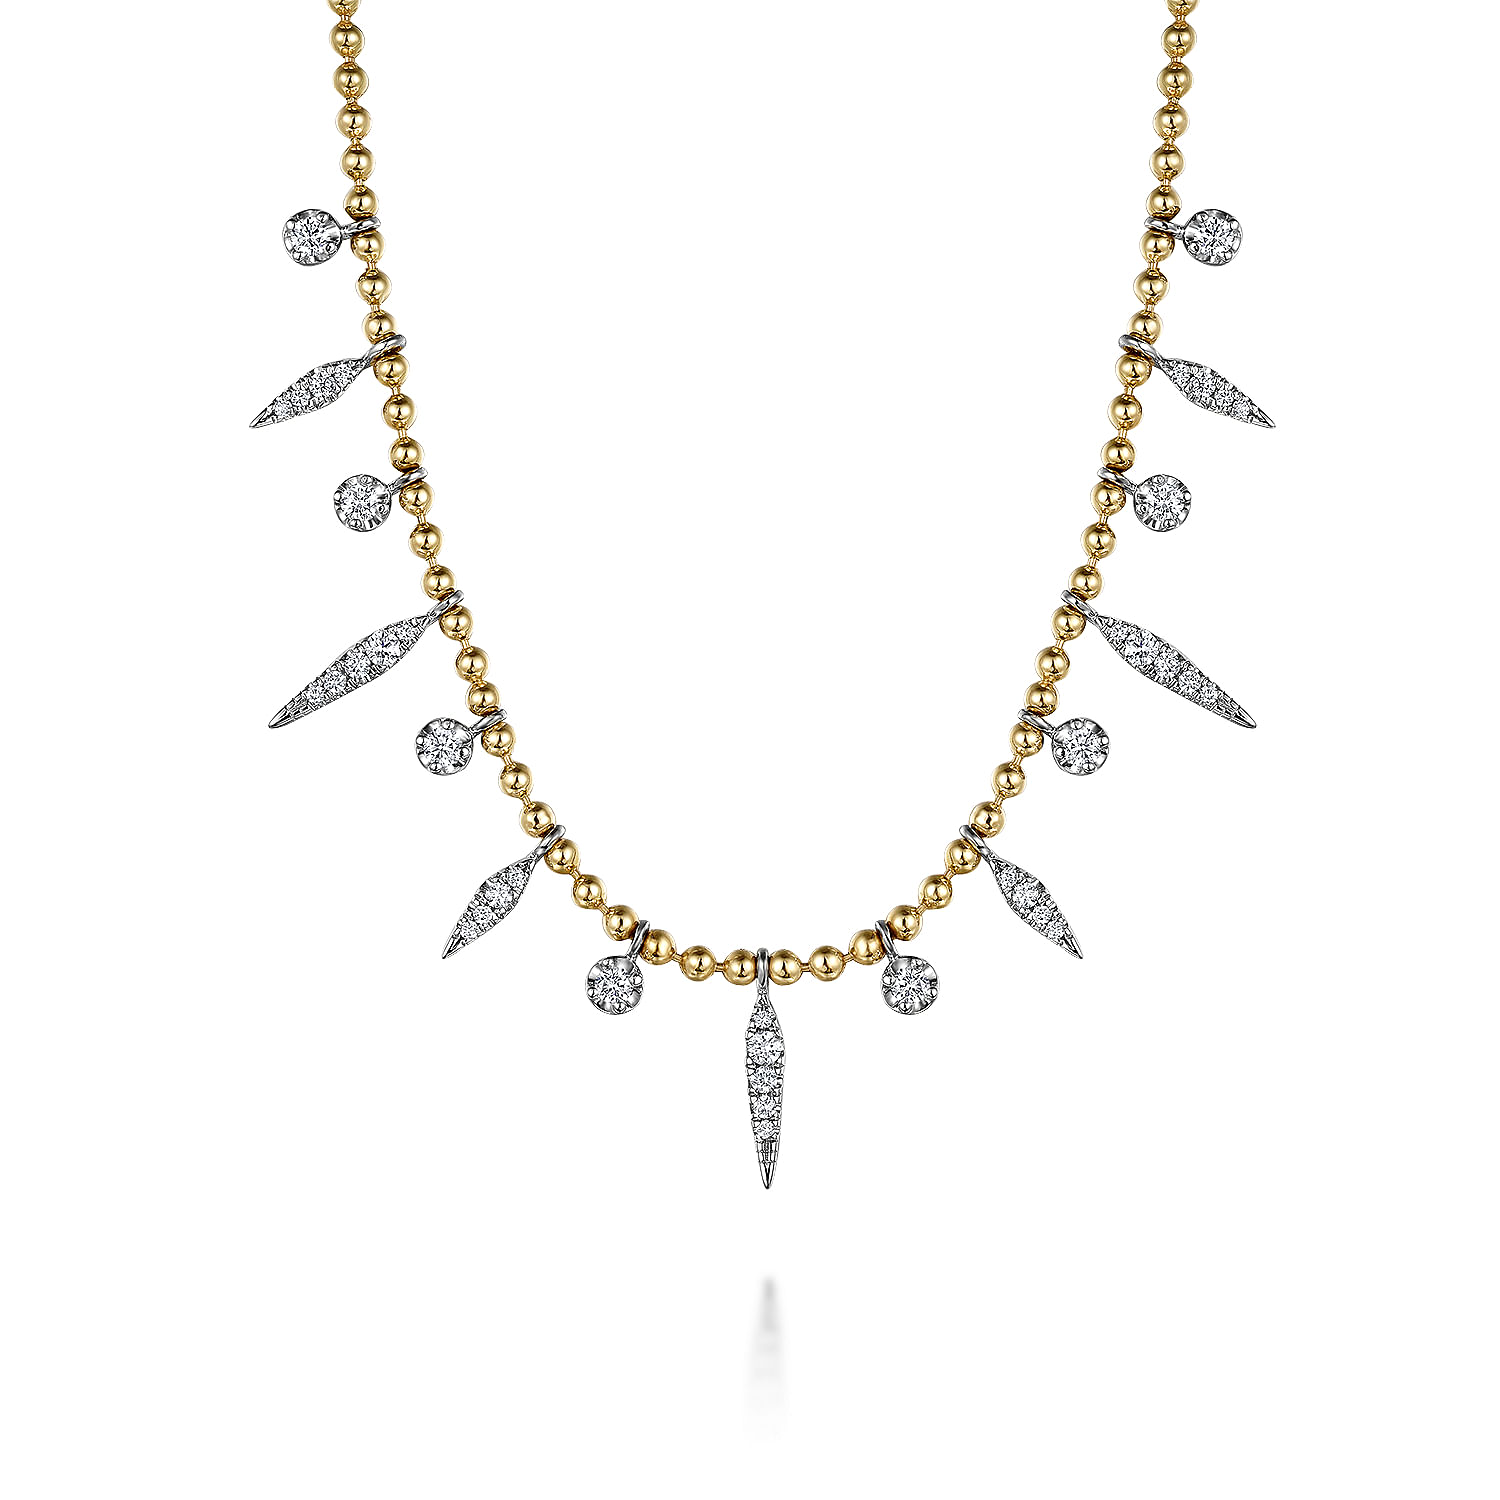 14K White and Yellow Gold Bead Chain and Diamond Droplet Necklace